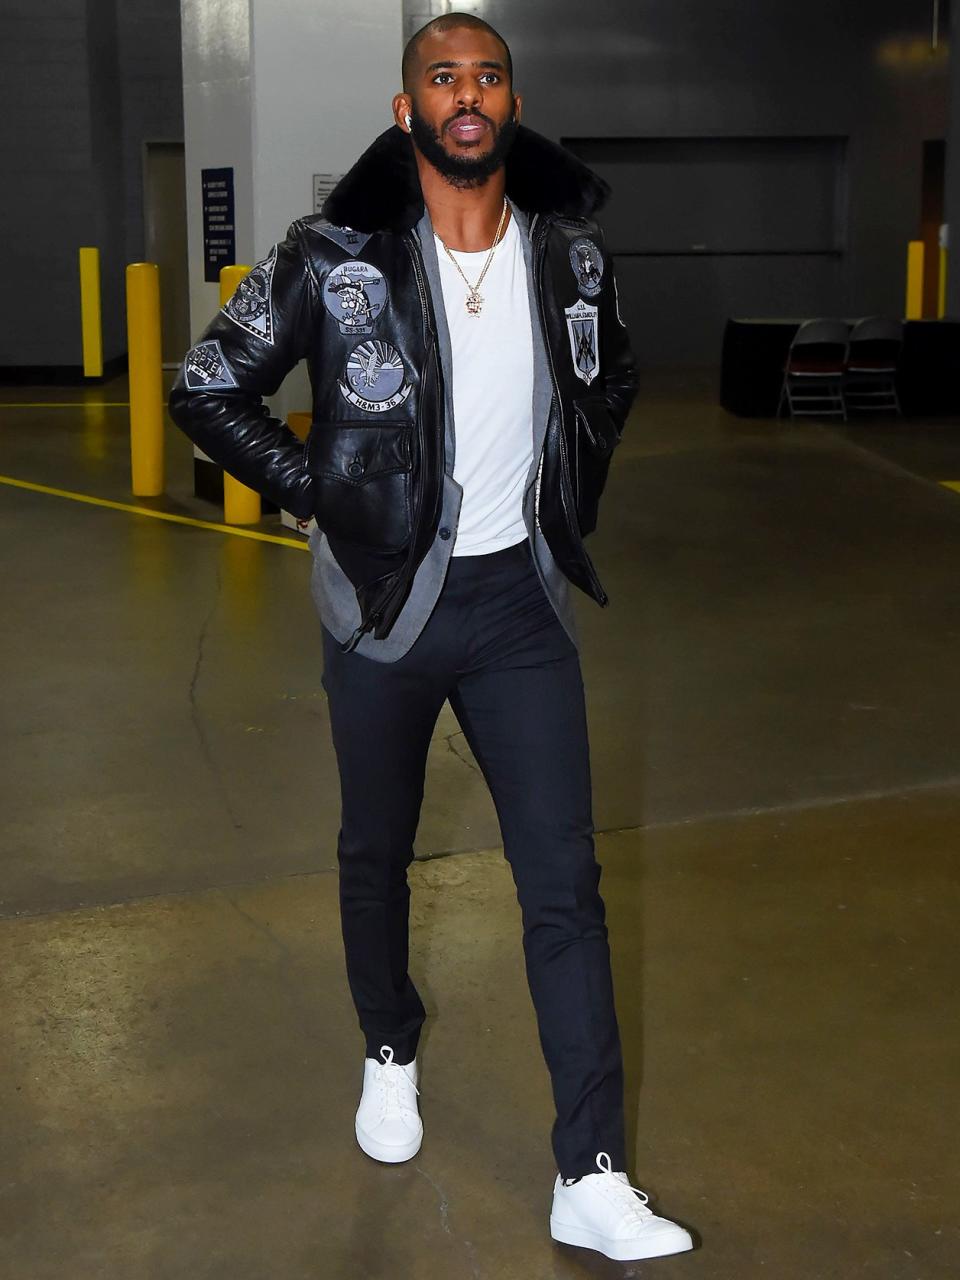 Mike B for Cockpit USA “Top Gun” jacket, Tom Ford blazer and pants, Common Project sneakers